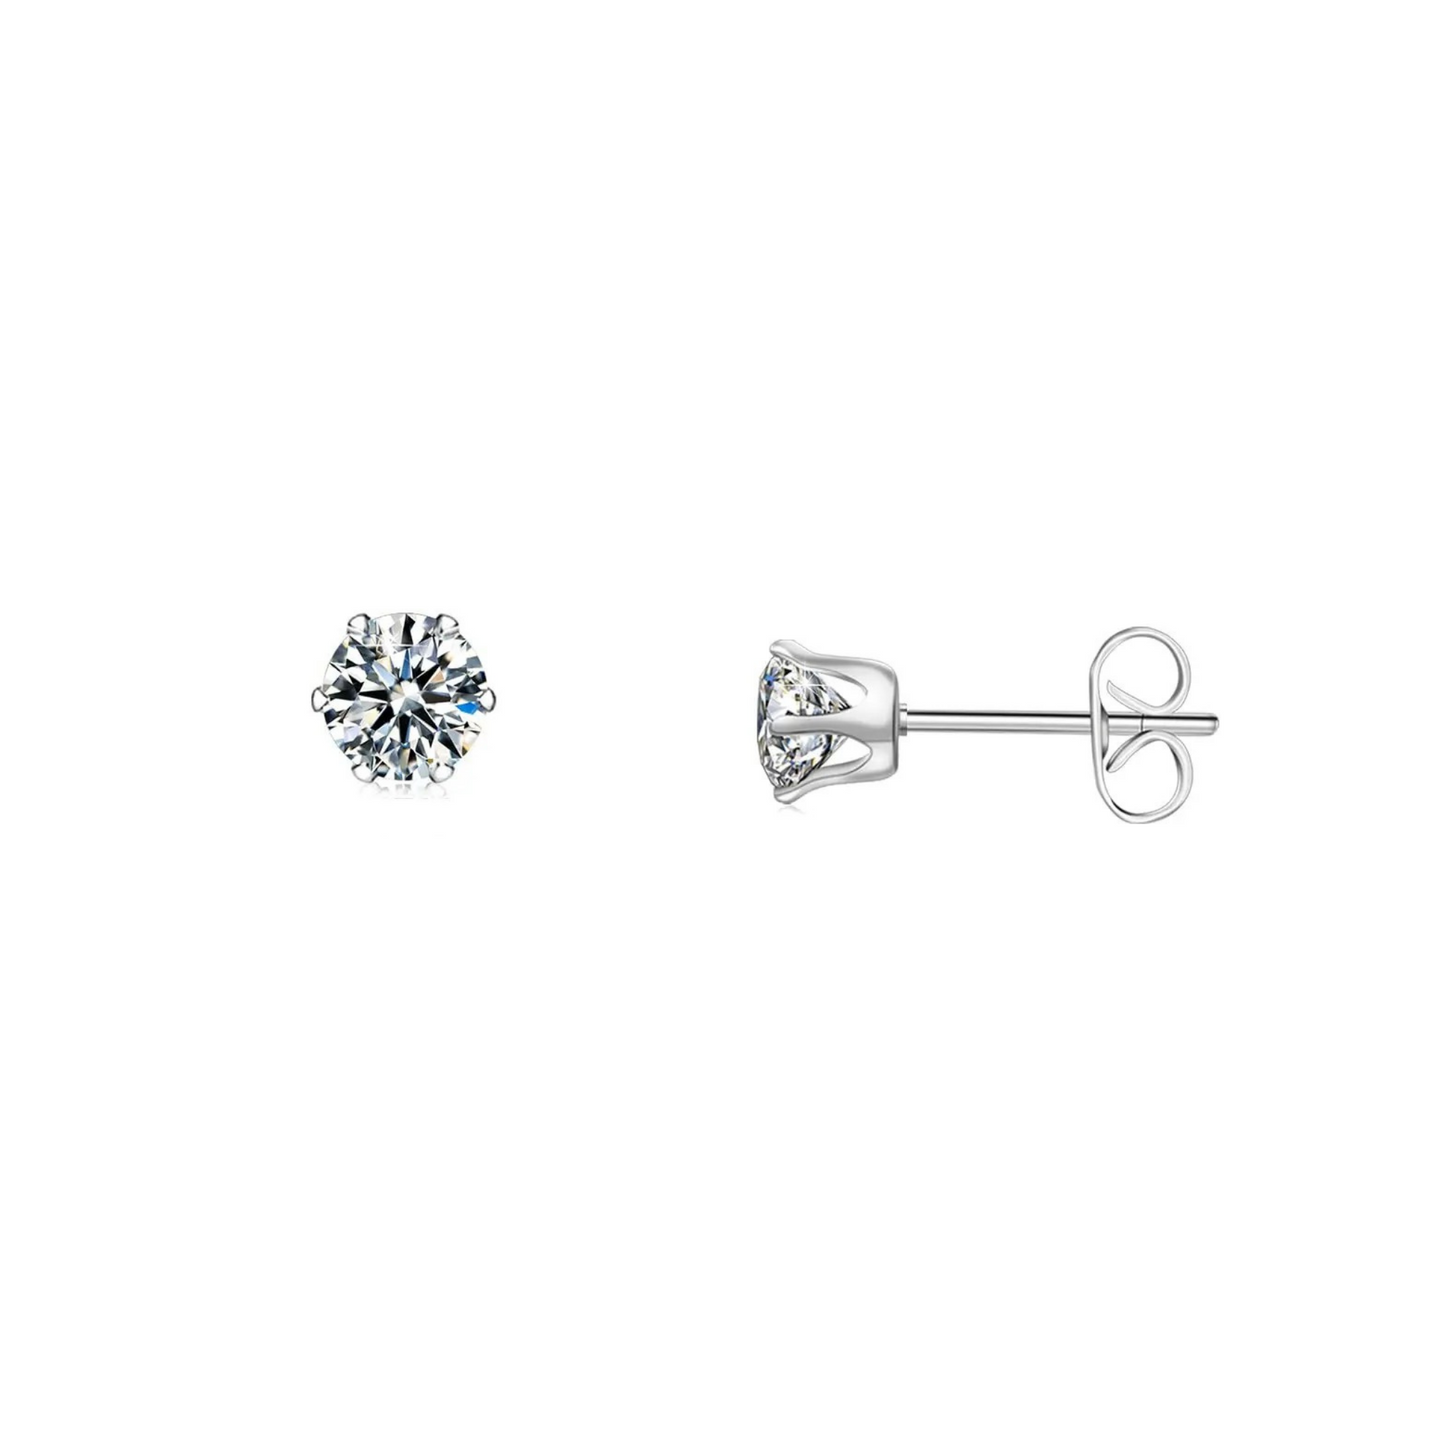 6.0mm Clear Round CZ Stud Earrings